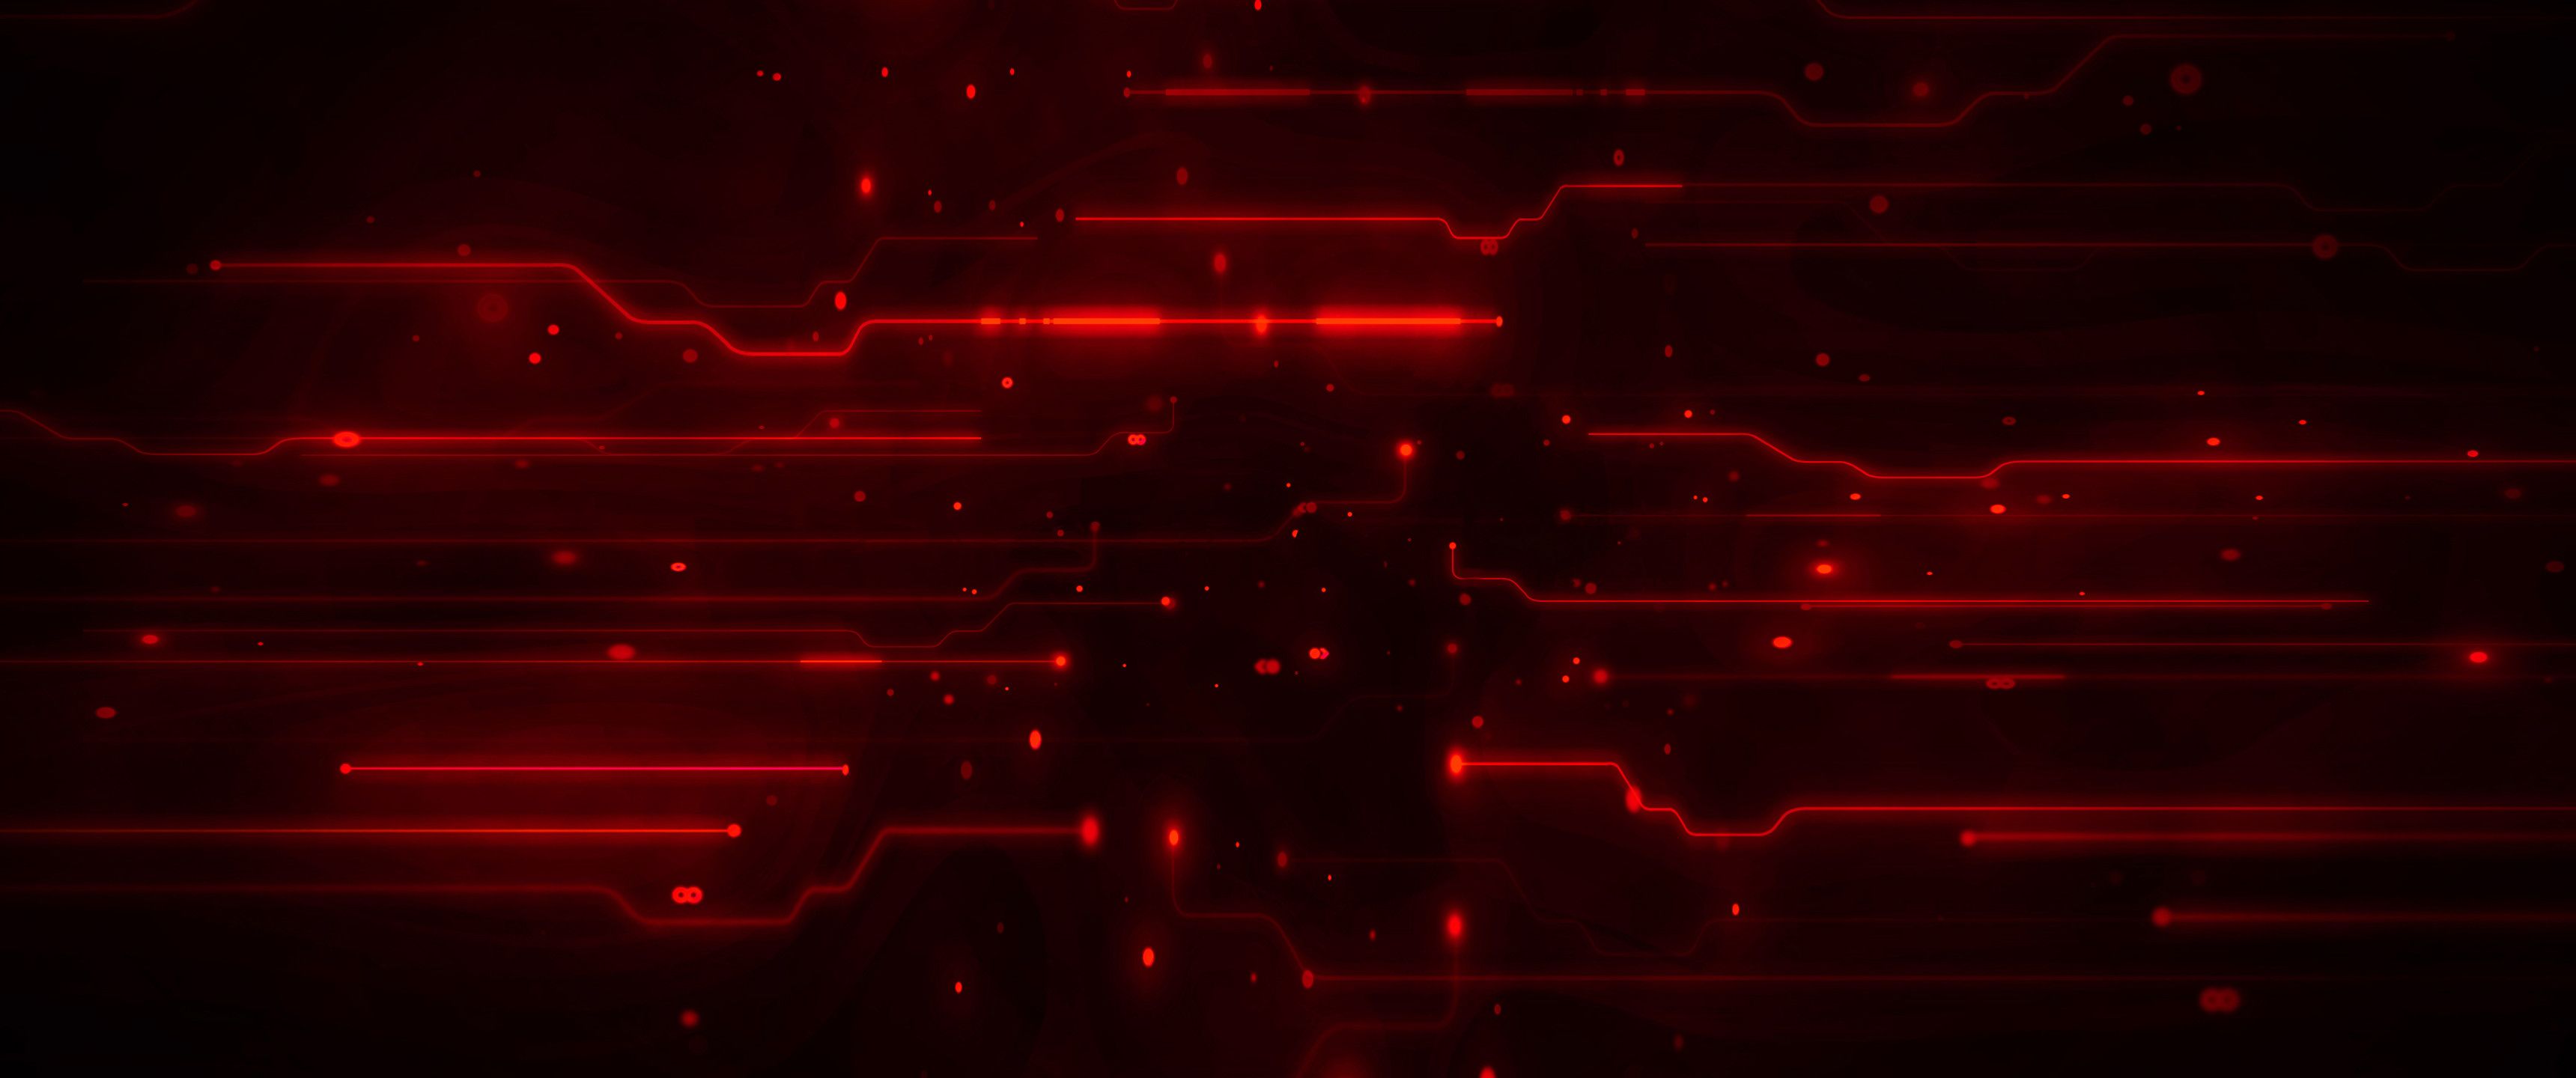 Red Ultra Wide Wallpapers - Top Free Red Ultra Wide Backgrounds ...